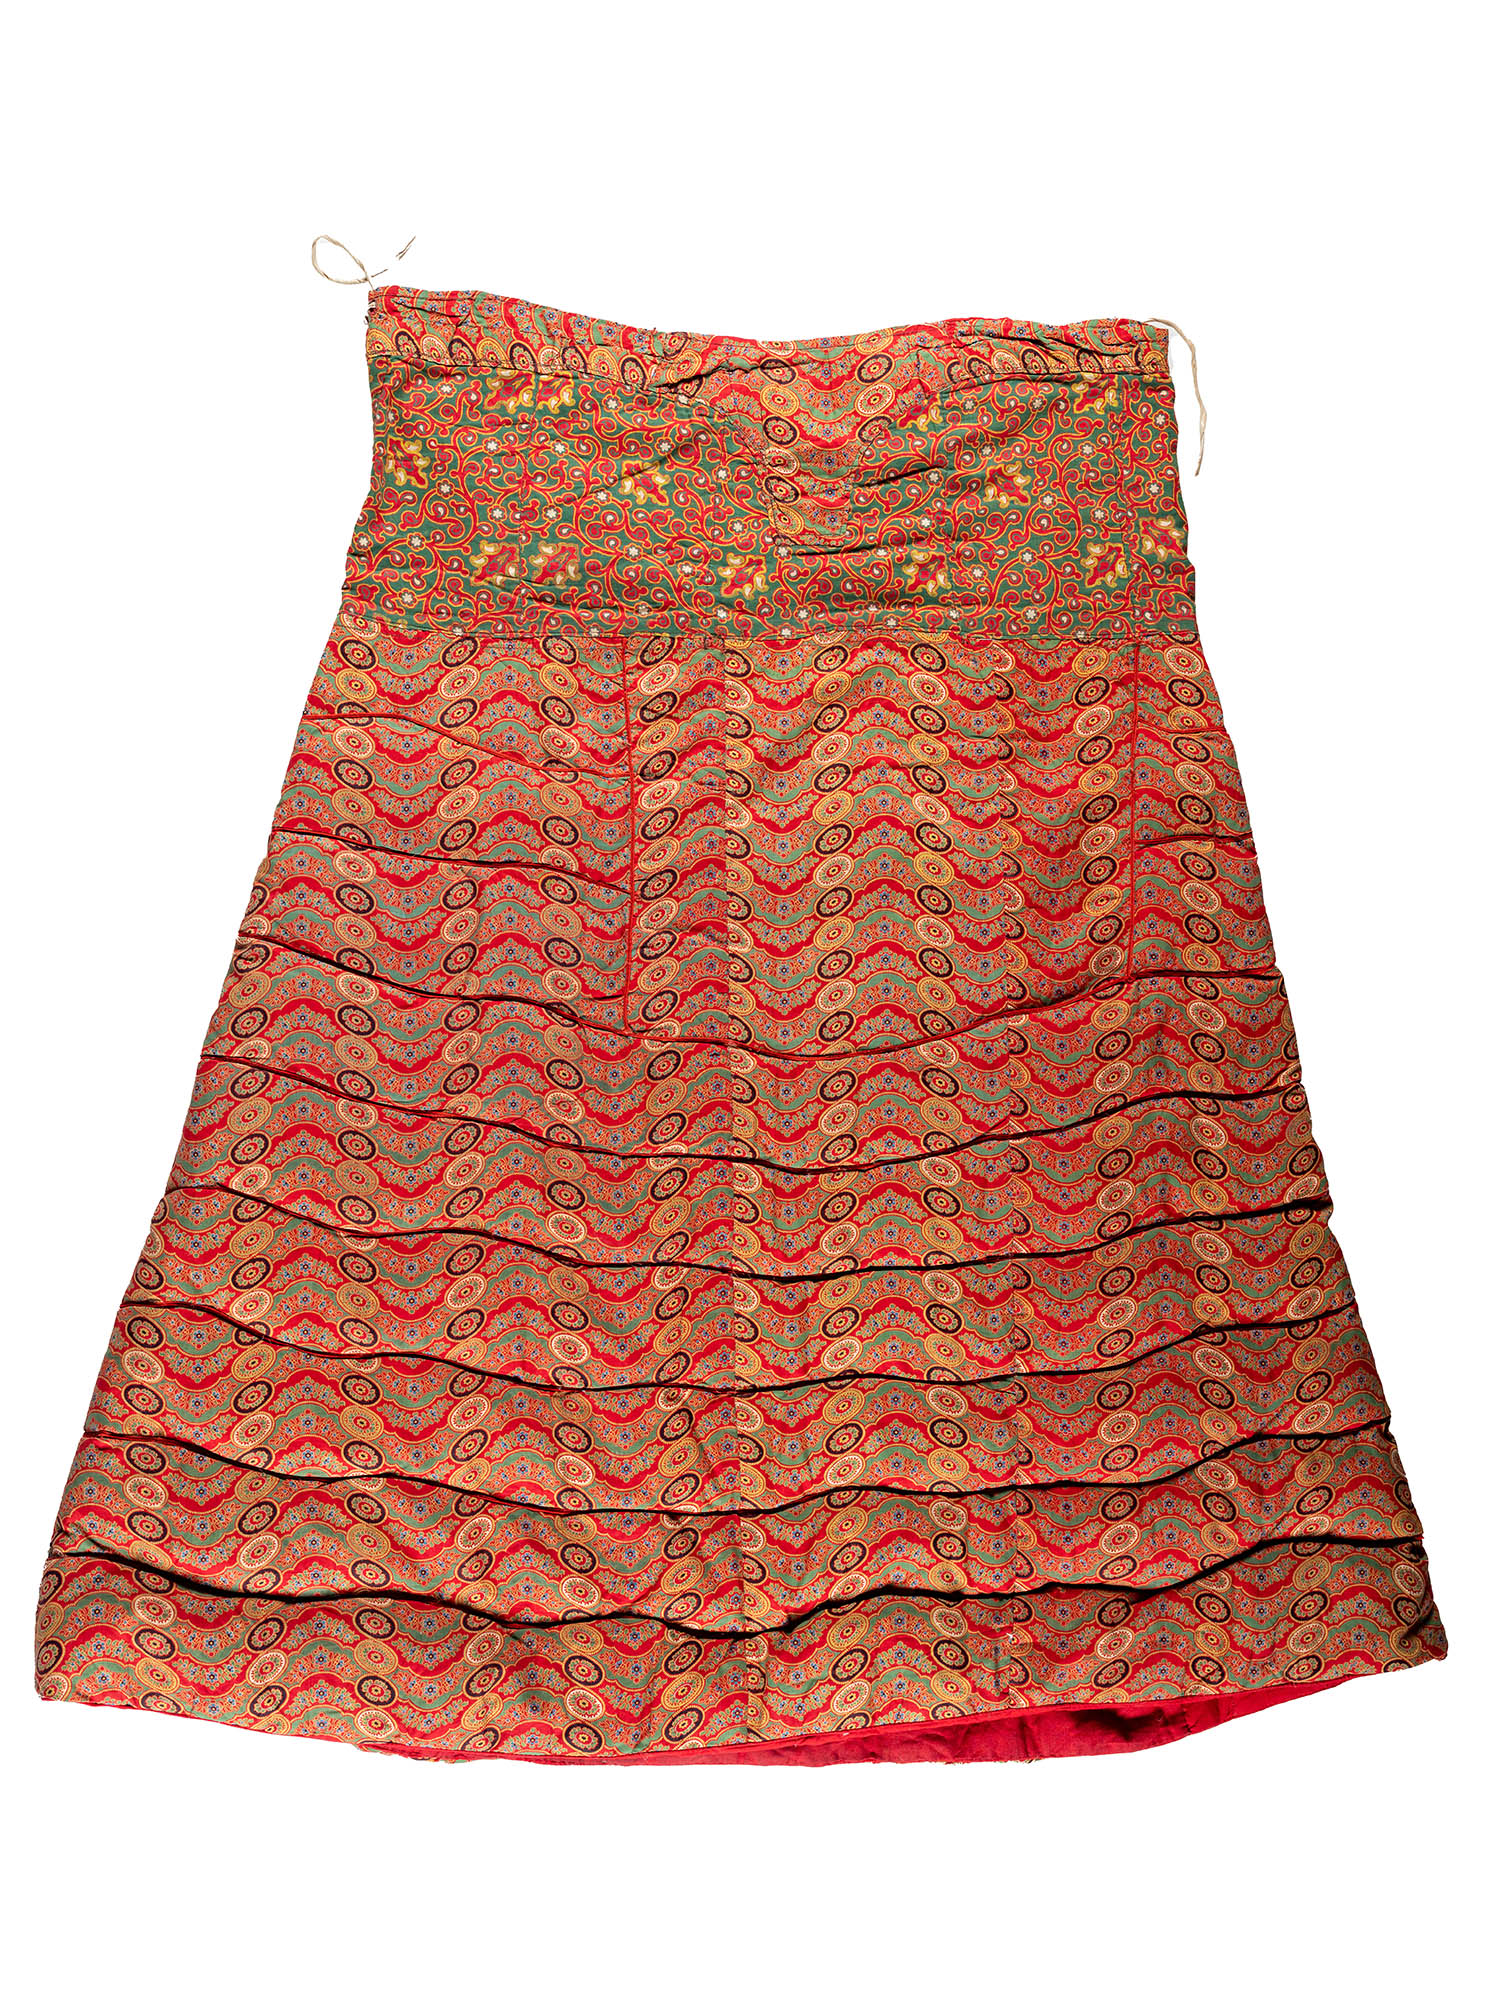 3A-20261-Turkey-red-printed-down-filled-petticoat_1